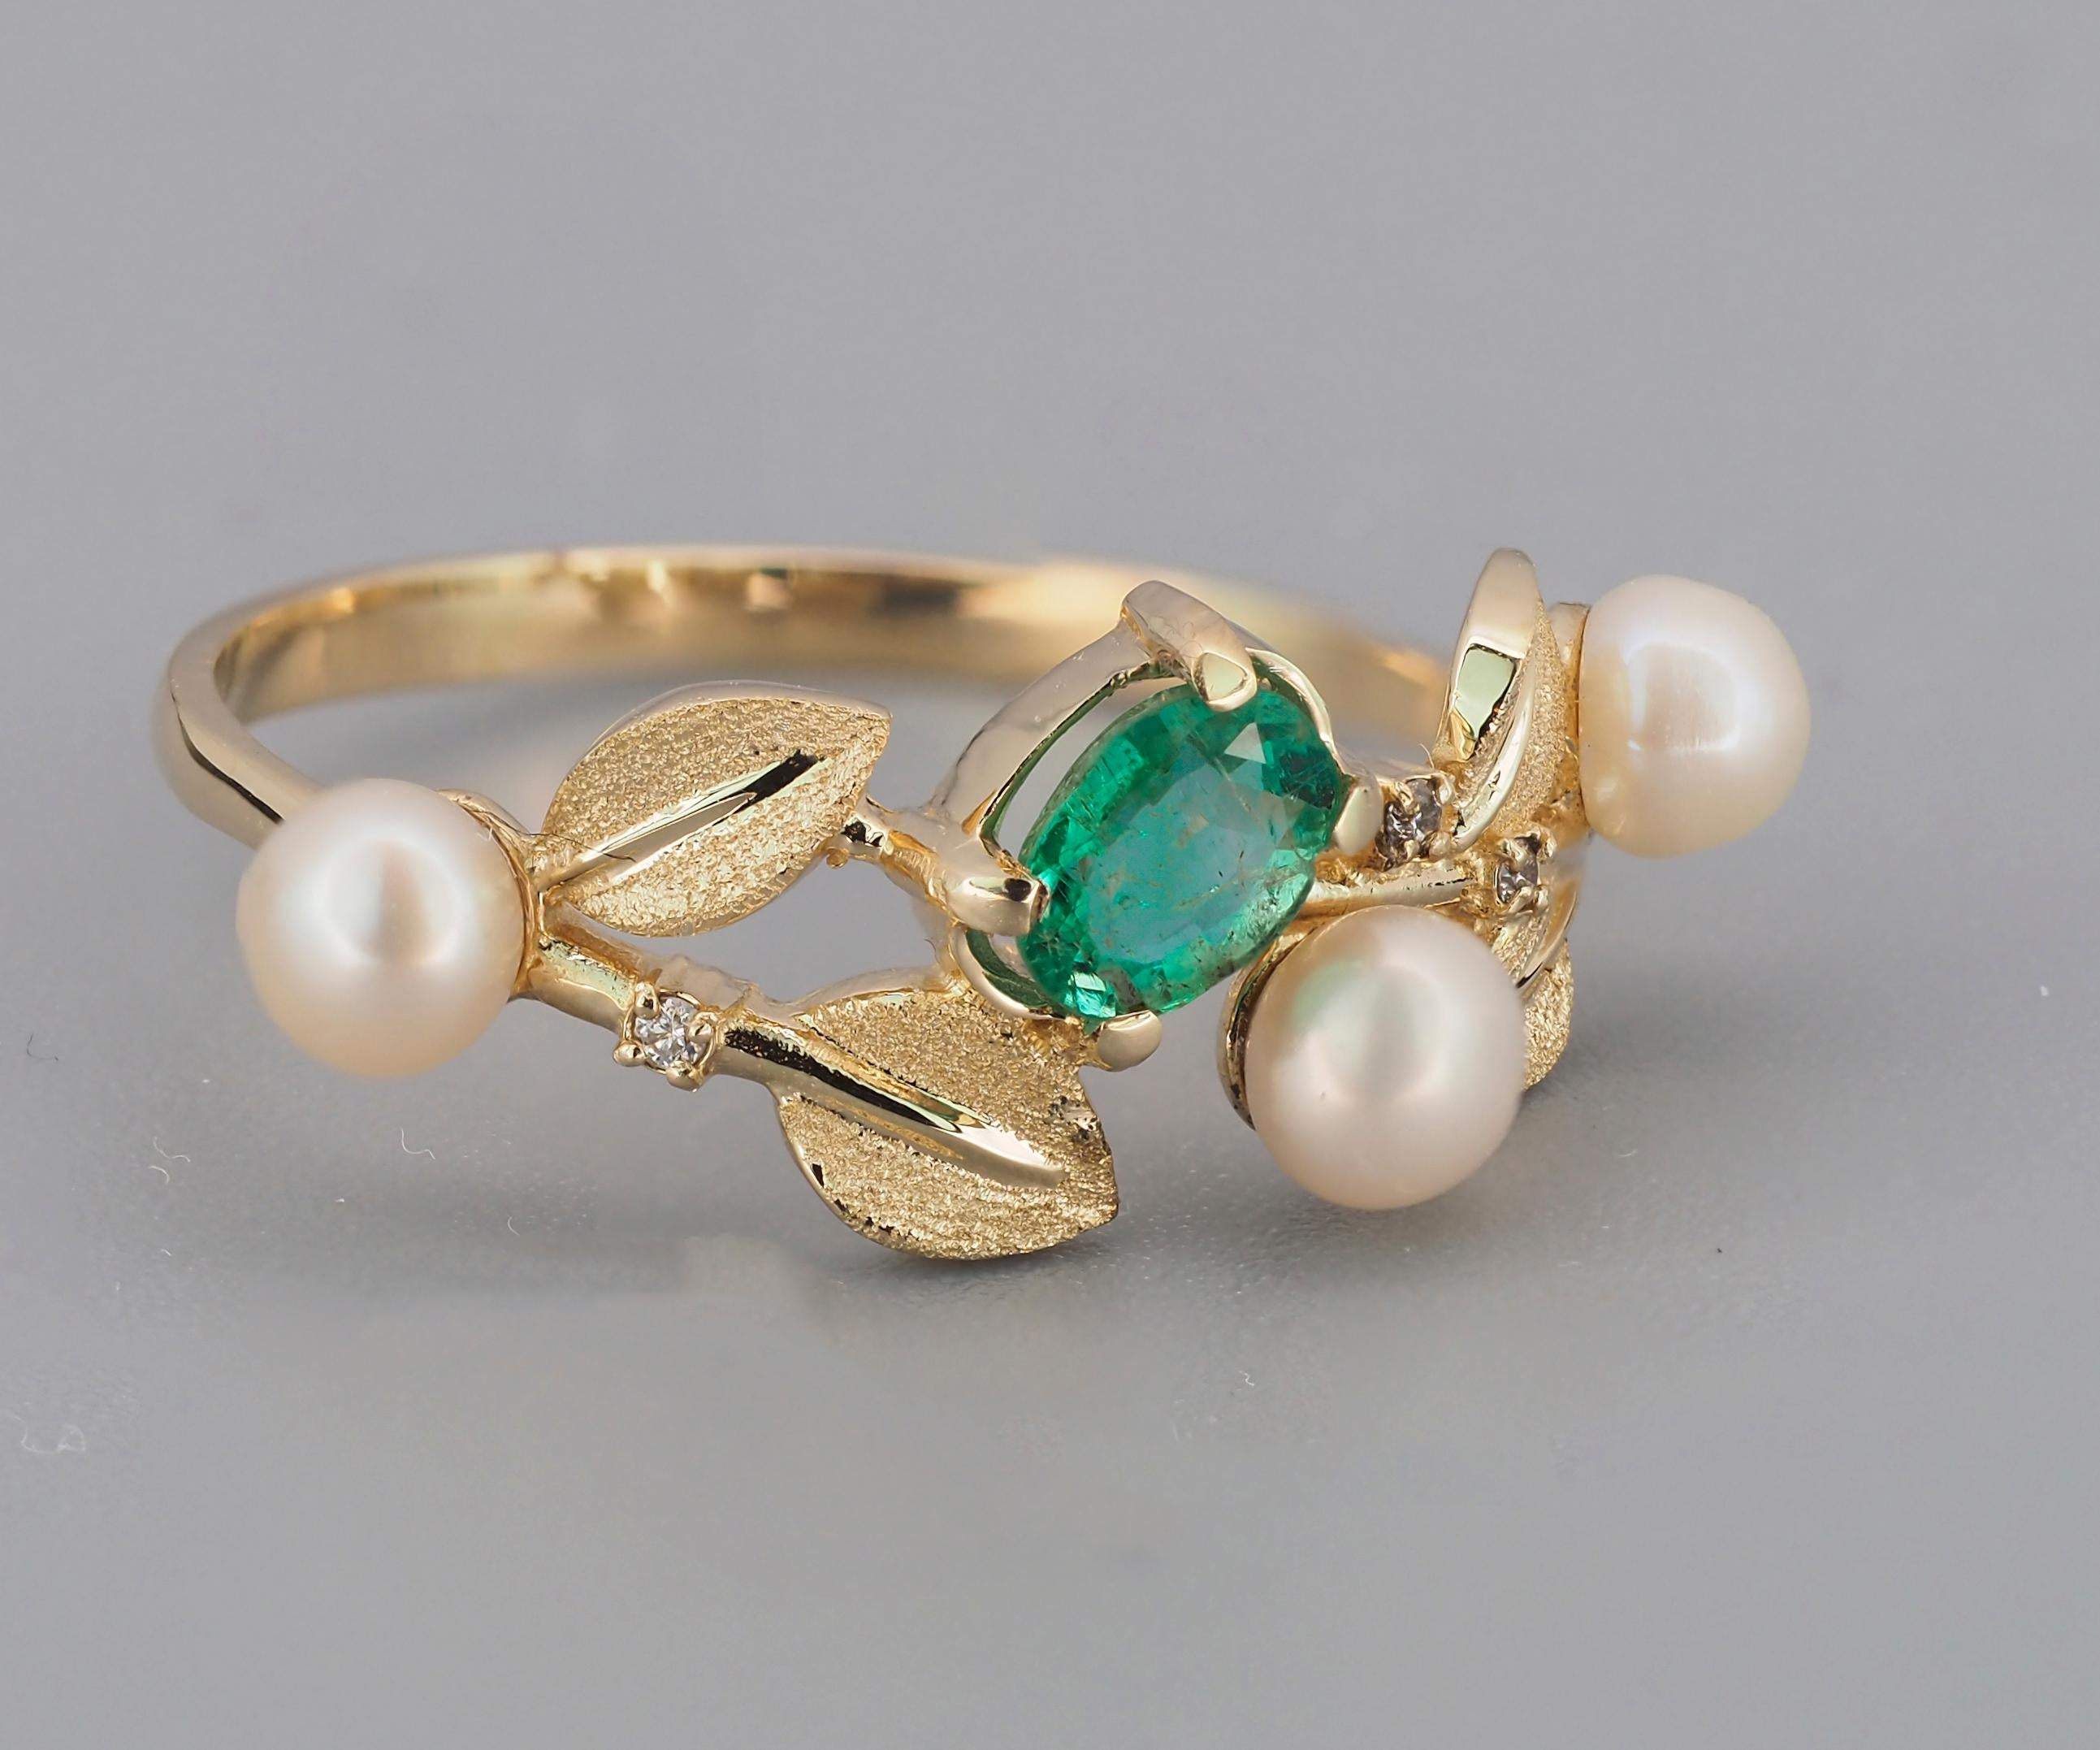 For Sale:  14k Gold Ring with Emerald, Pearls and Diamonds 3